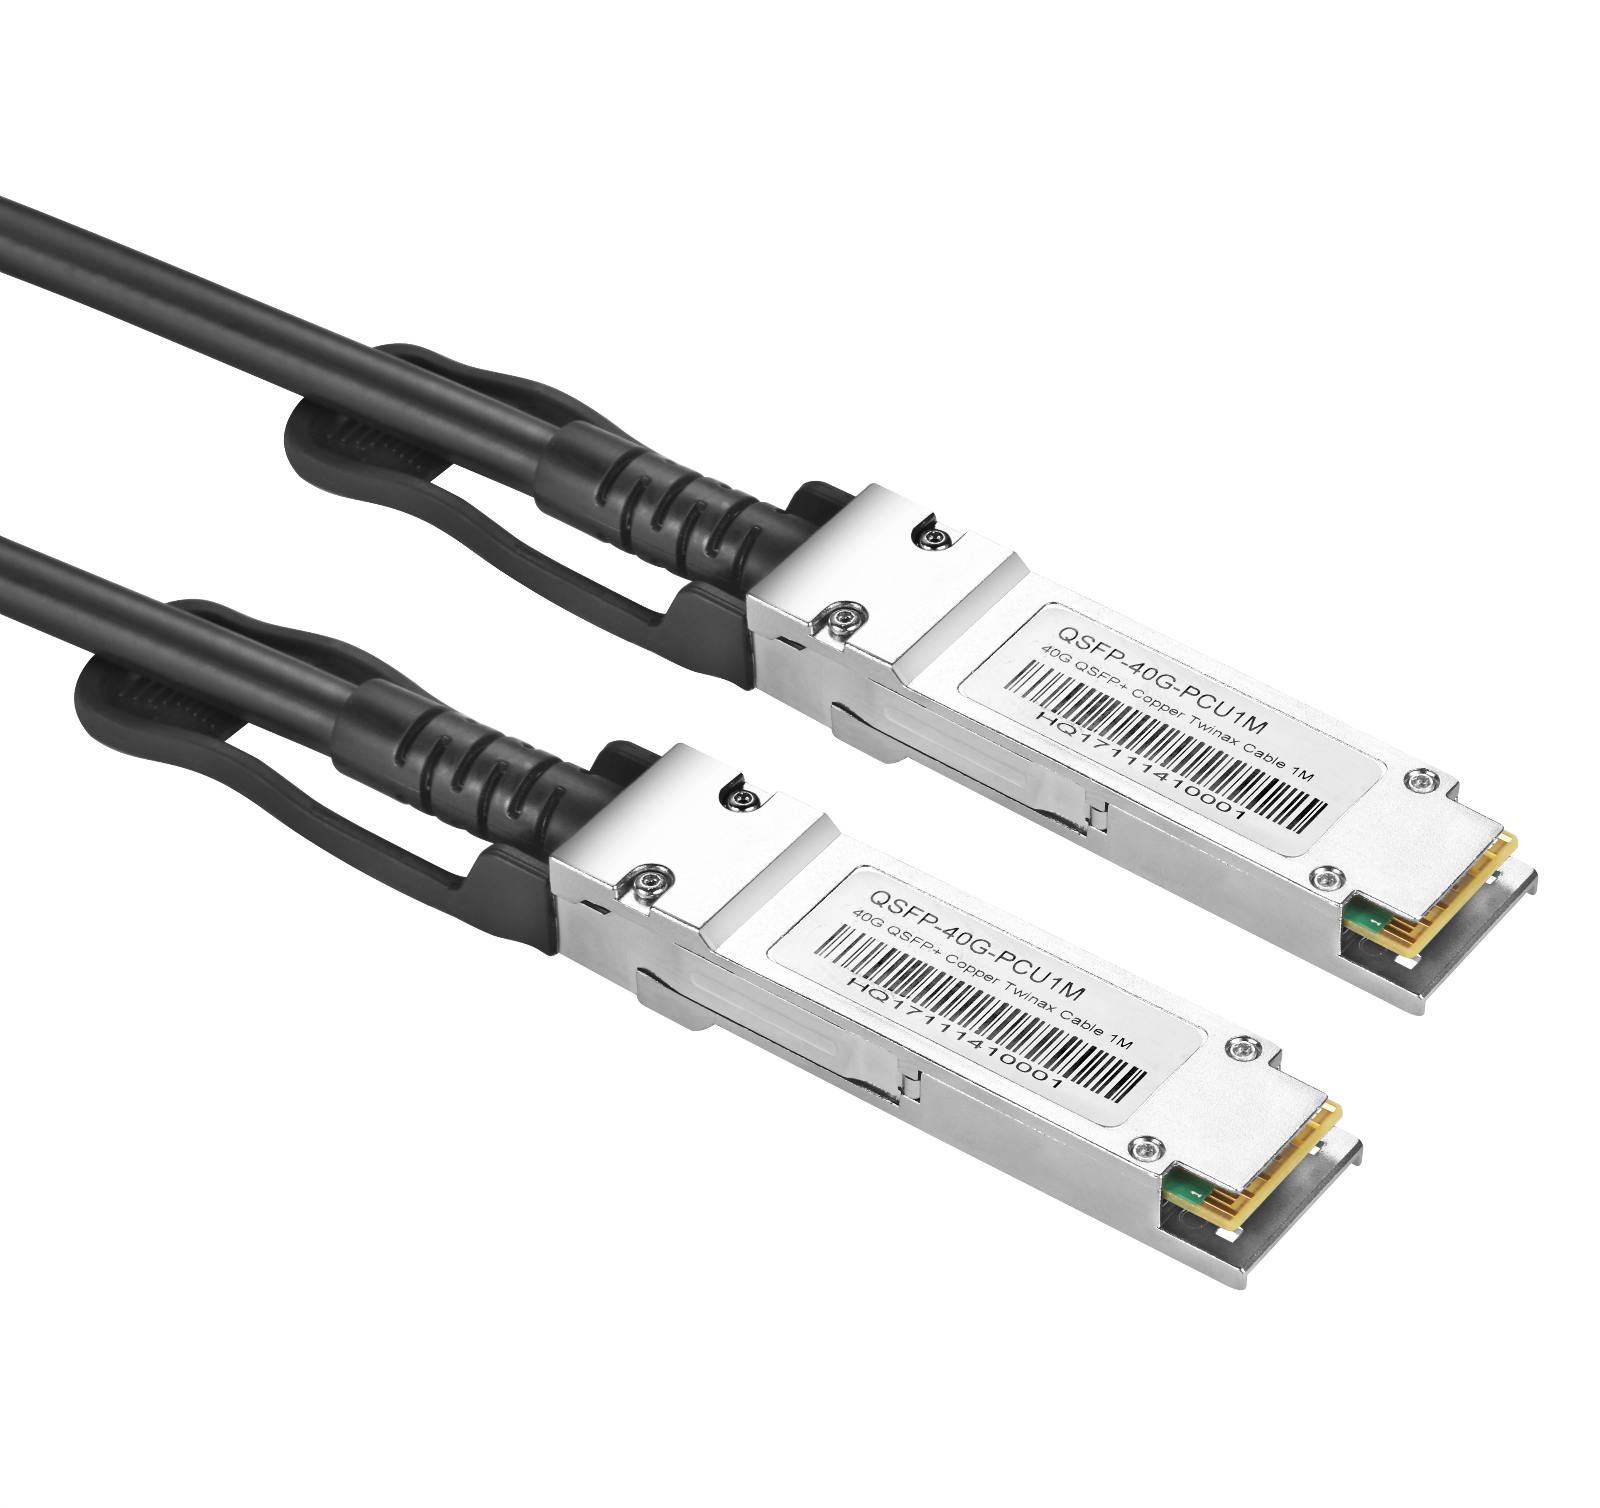 Leading sales 10G SFP DACprovides first-class service